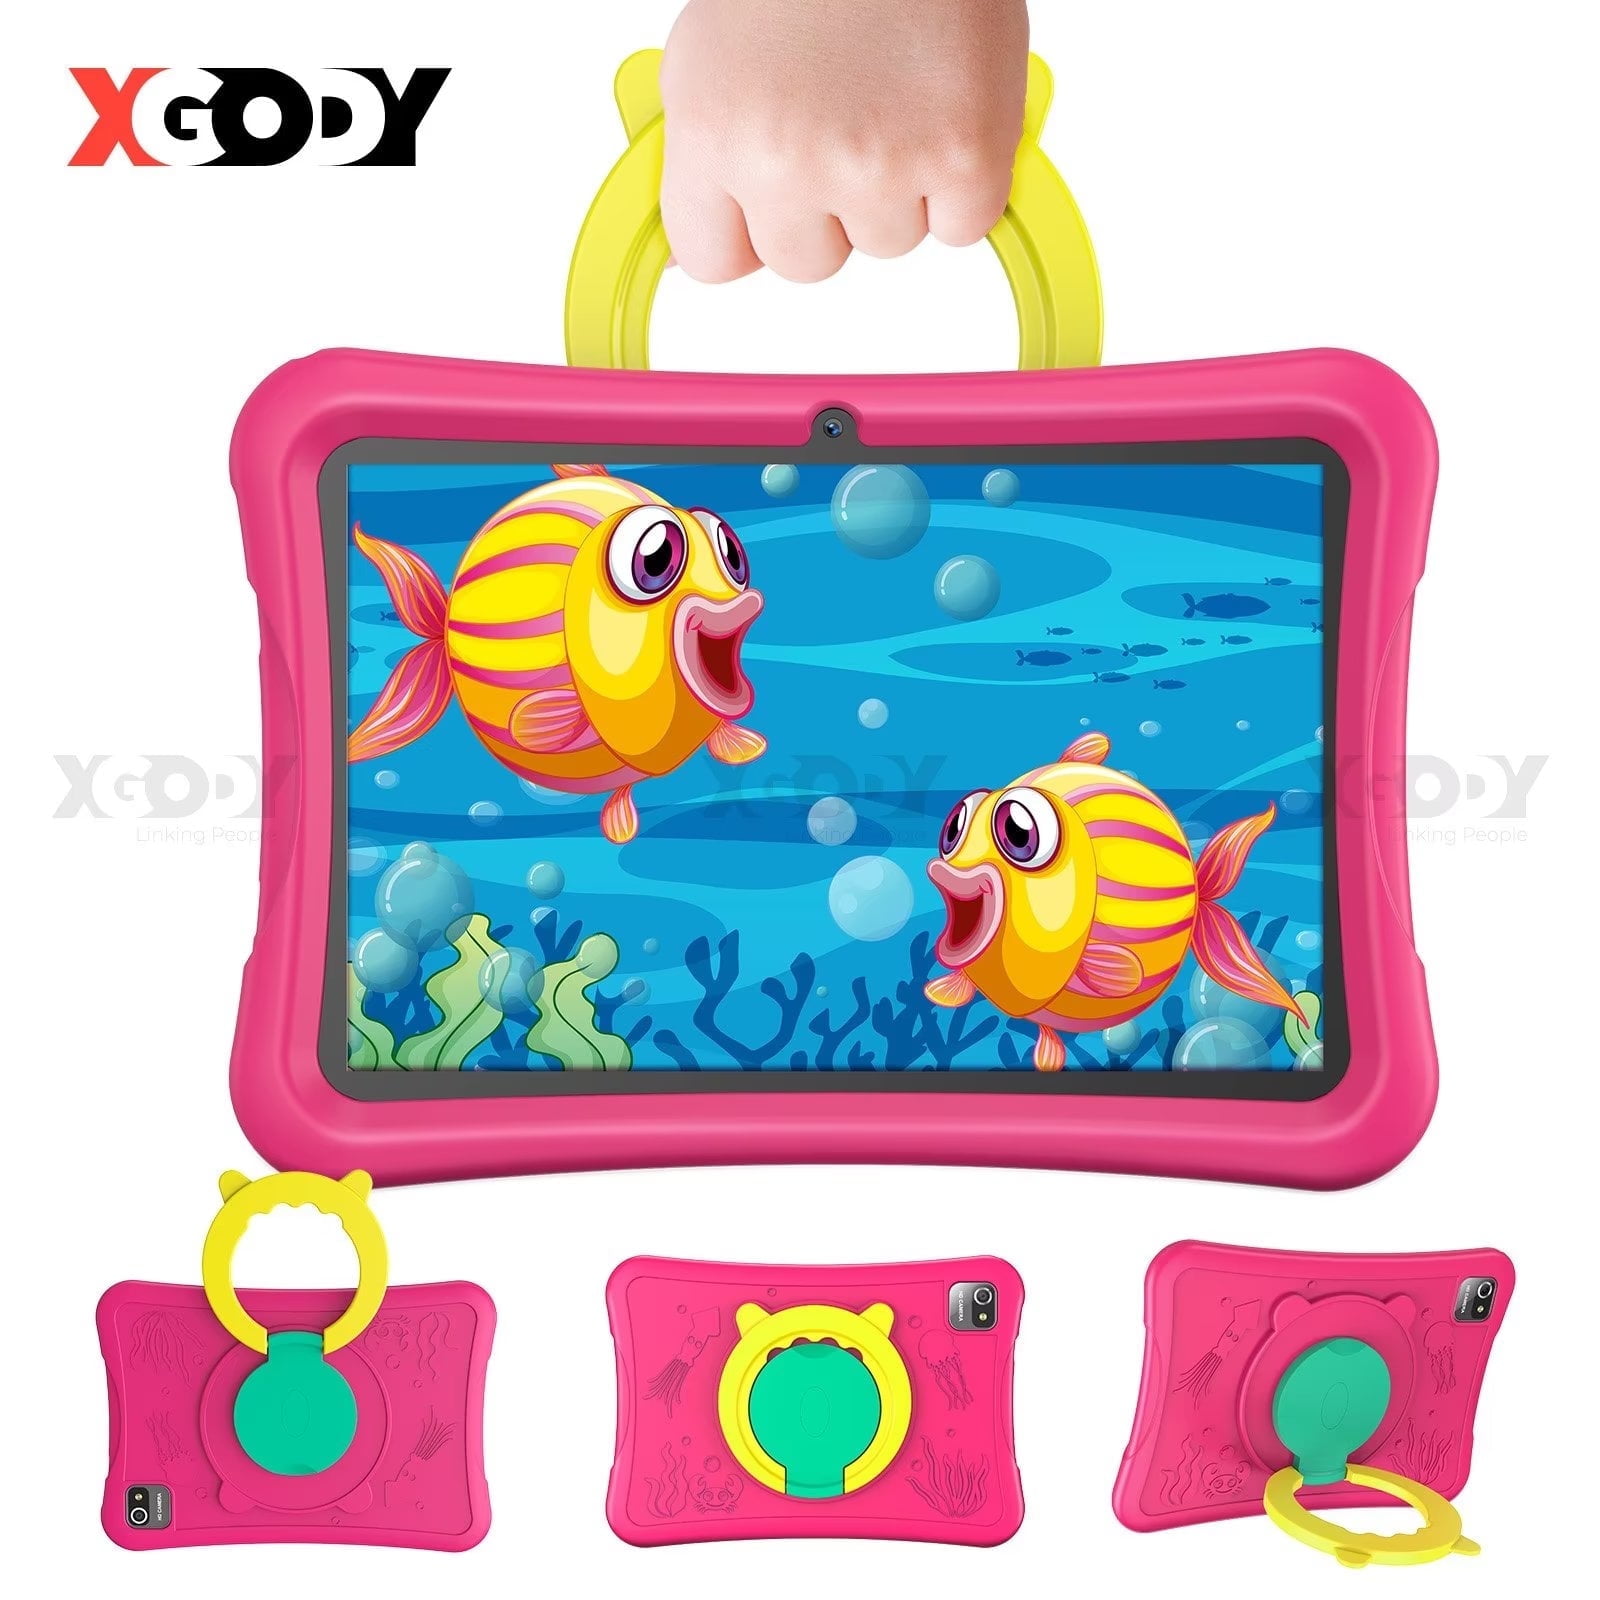 XGODY 10.1 Inch Kids Tablet Android 11.0 Toddler Tablet For Kids Children Teen 4GB RAM 64 ROM Kids Learning Tablet, 6000mAh, Type-c